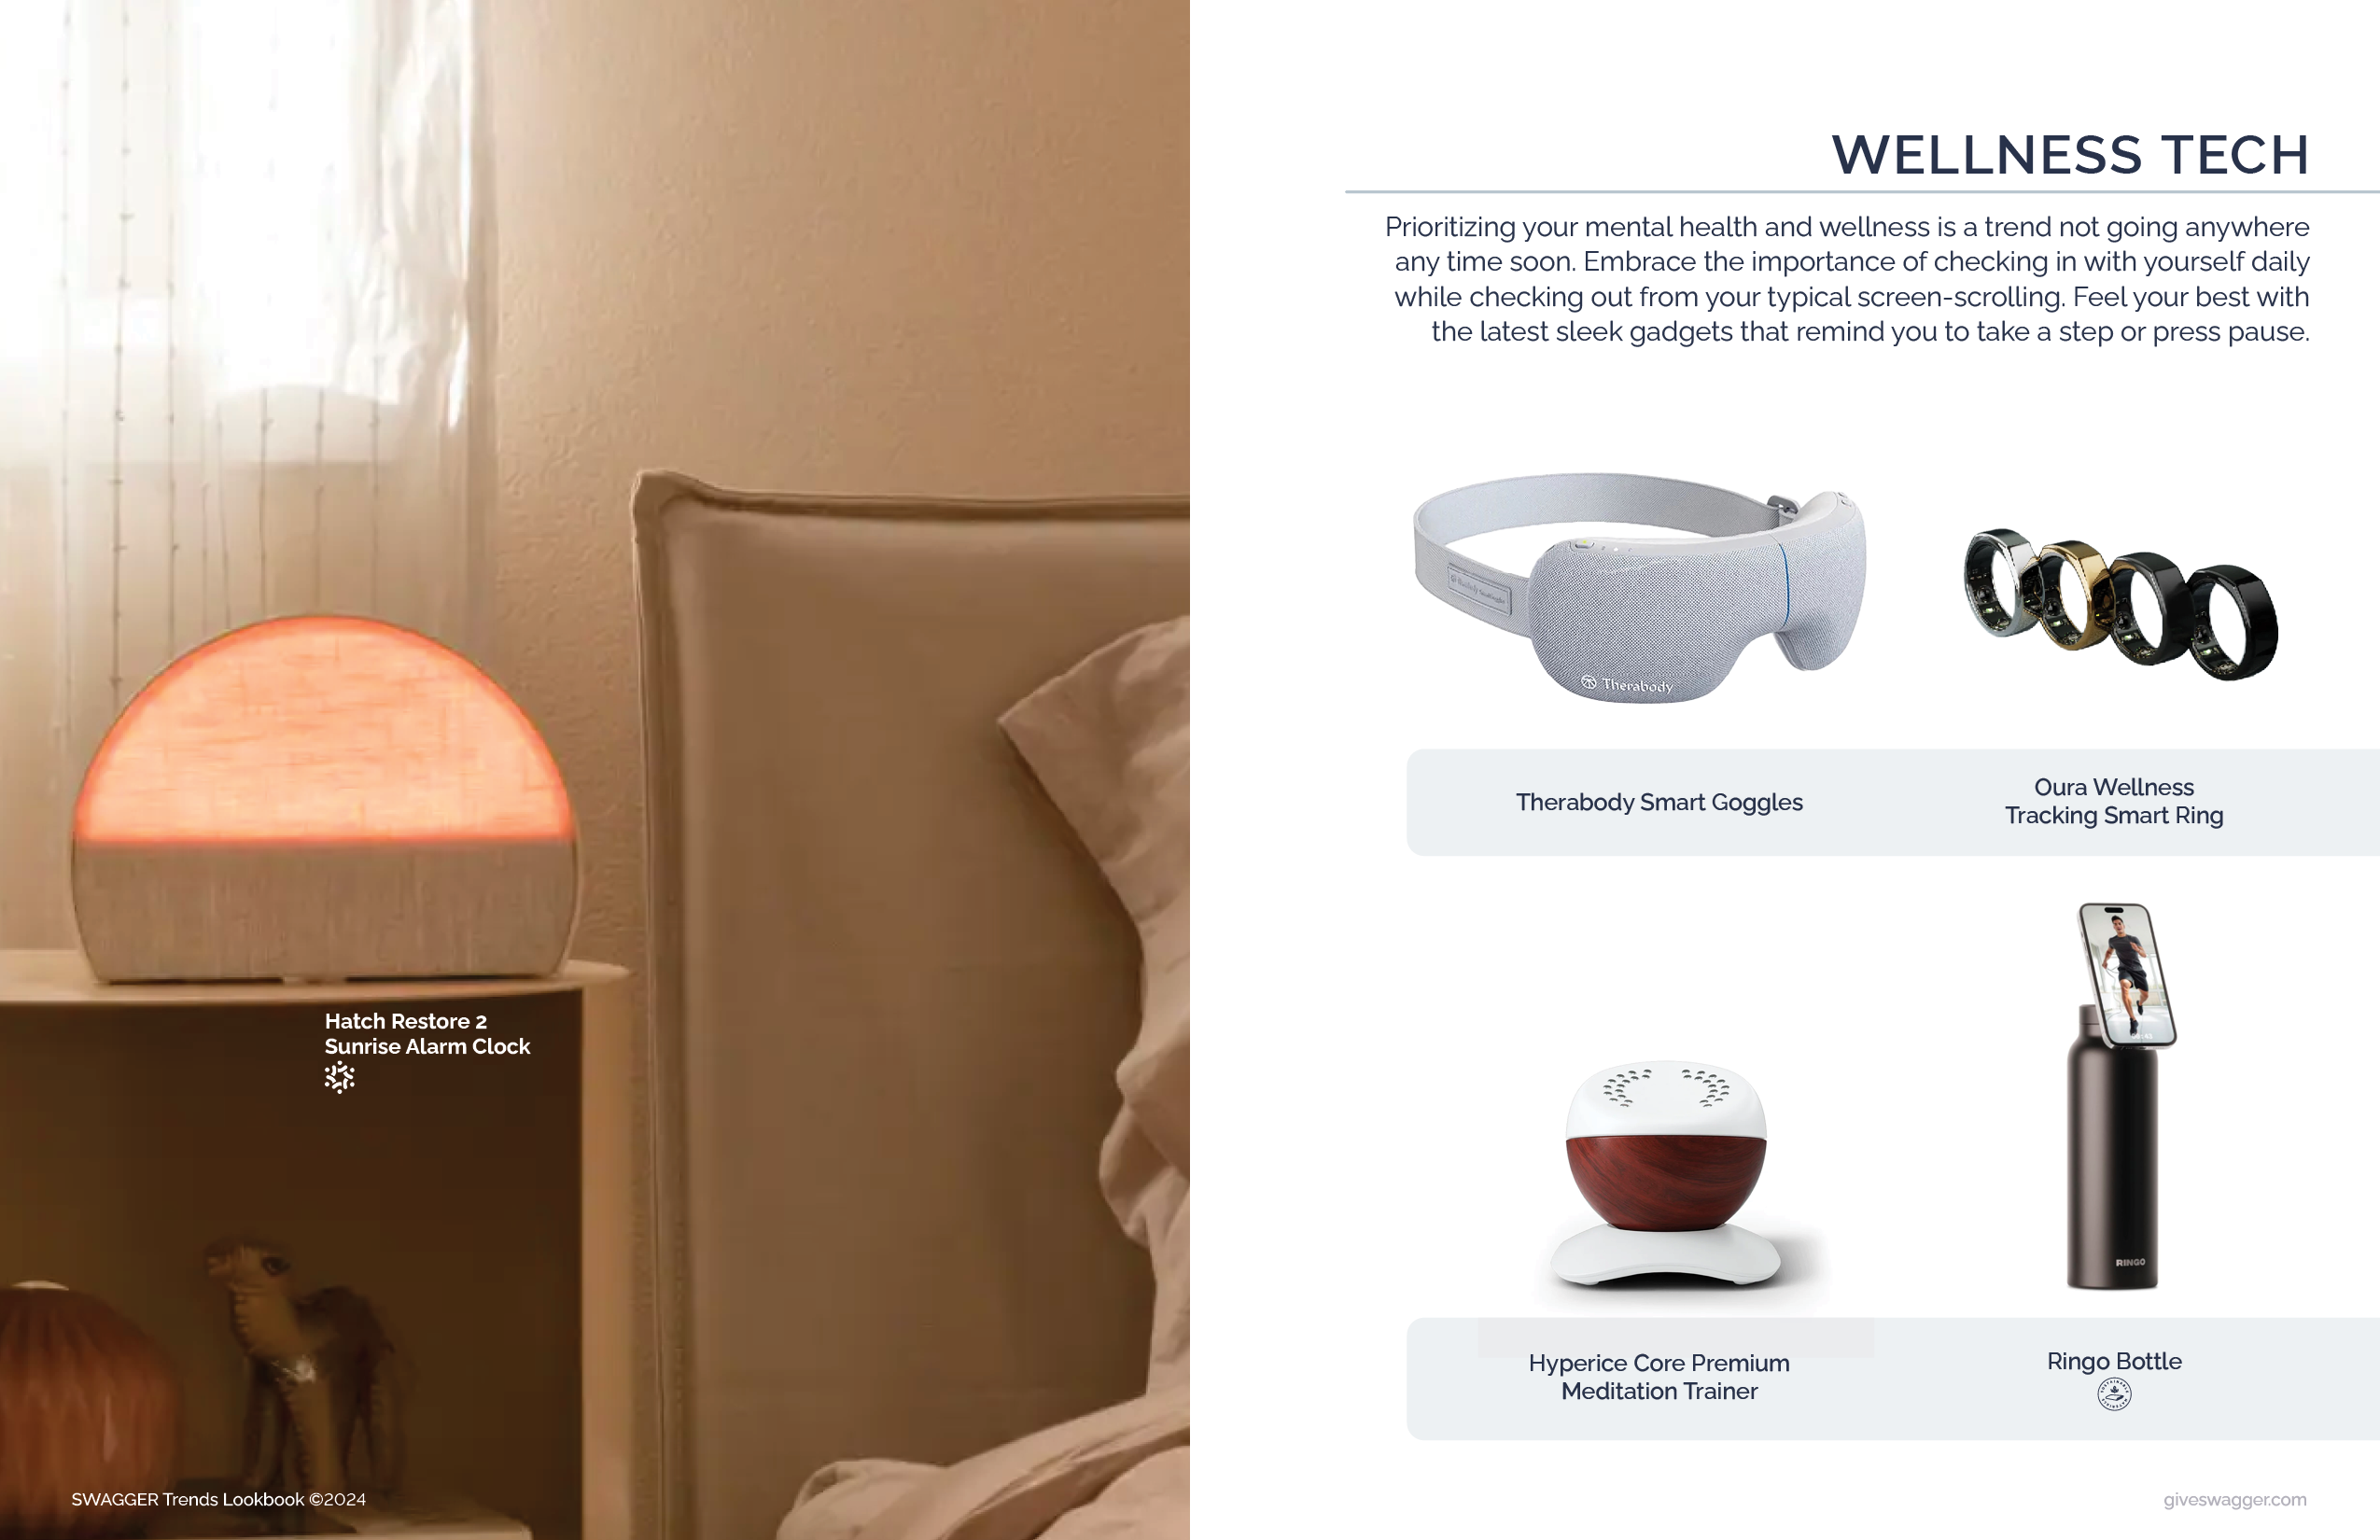 Featured images of company branded swag Hatch Restore 2 Sunrise Alarm Clock, Therabody Smart Goggles, Oura Wellness Tracking Smart Ring, Hyperice Core Premium Meditation Trainer, and Ringo Bottle curated by Swagger.